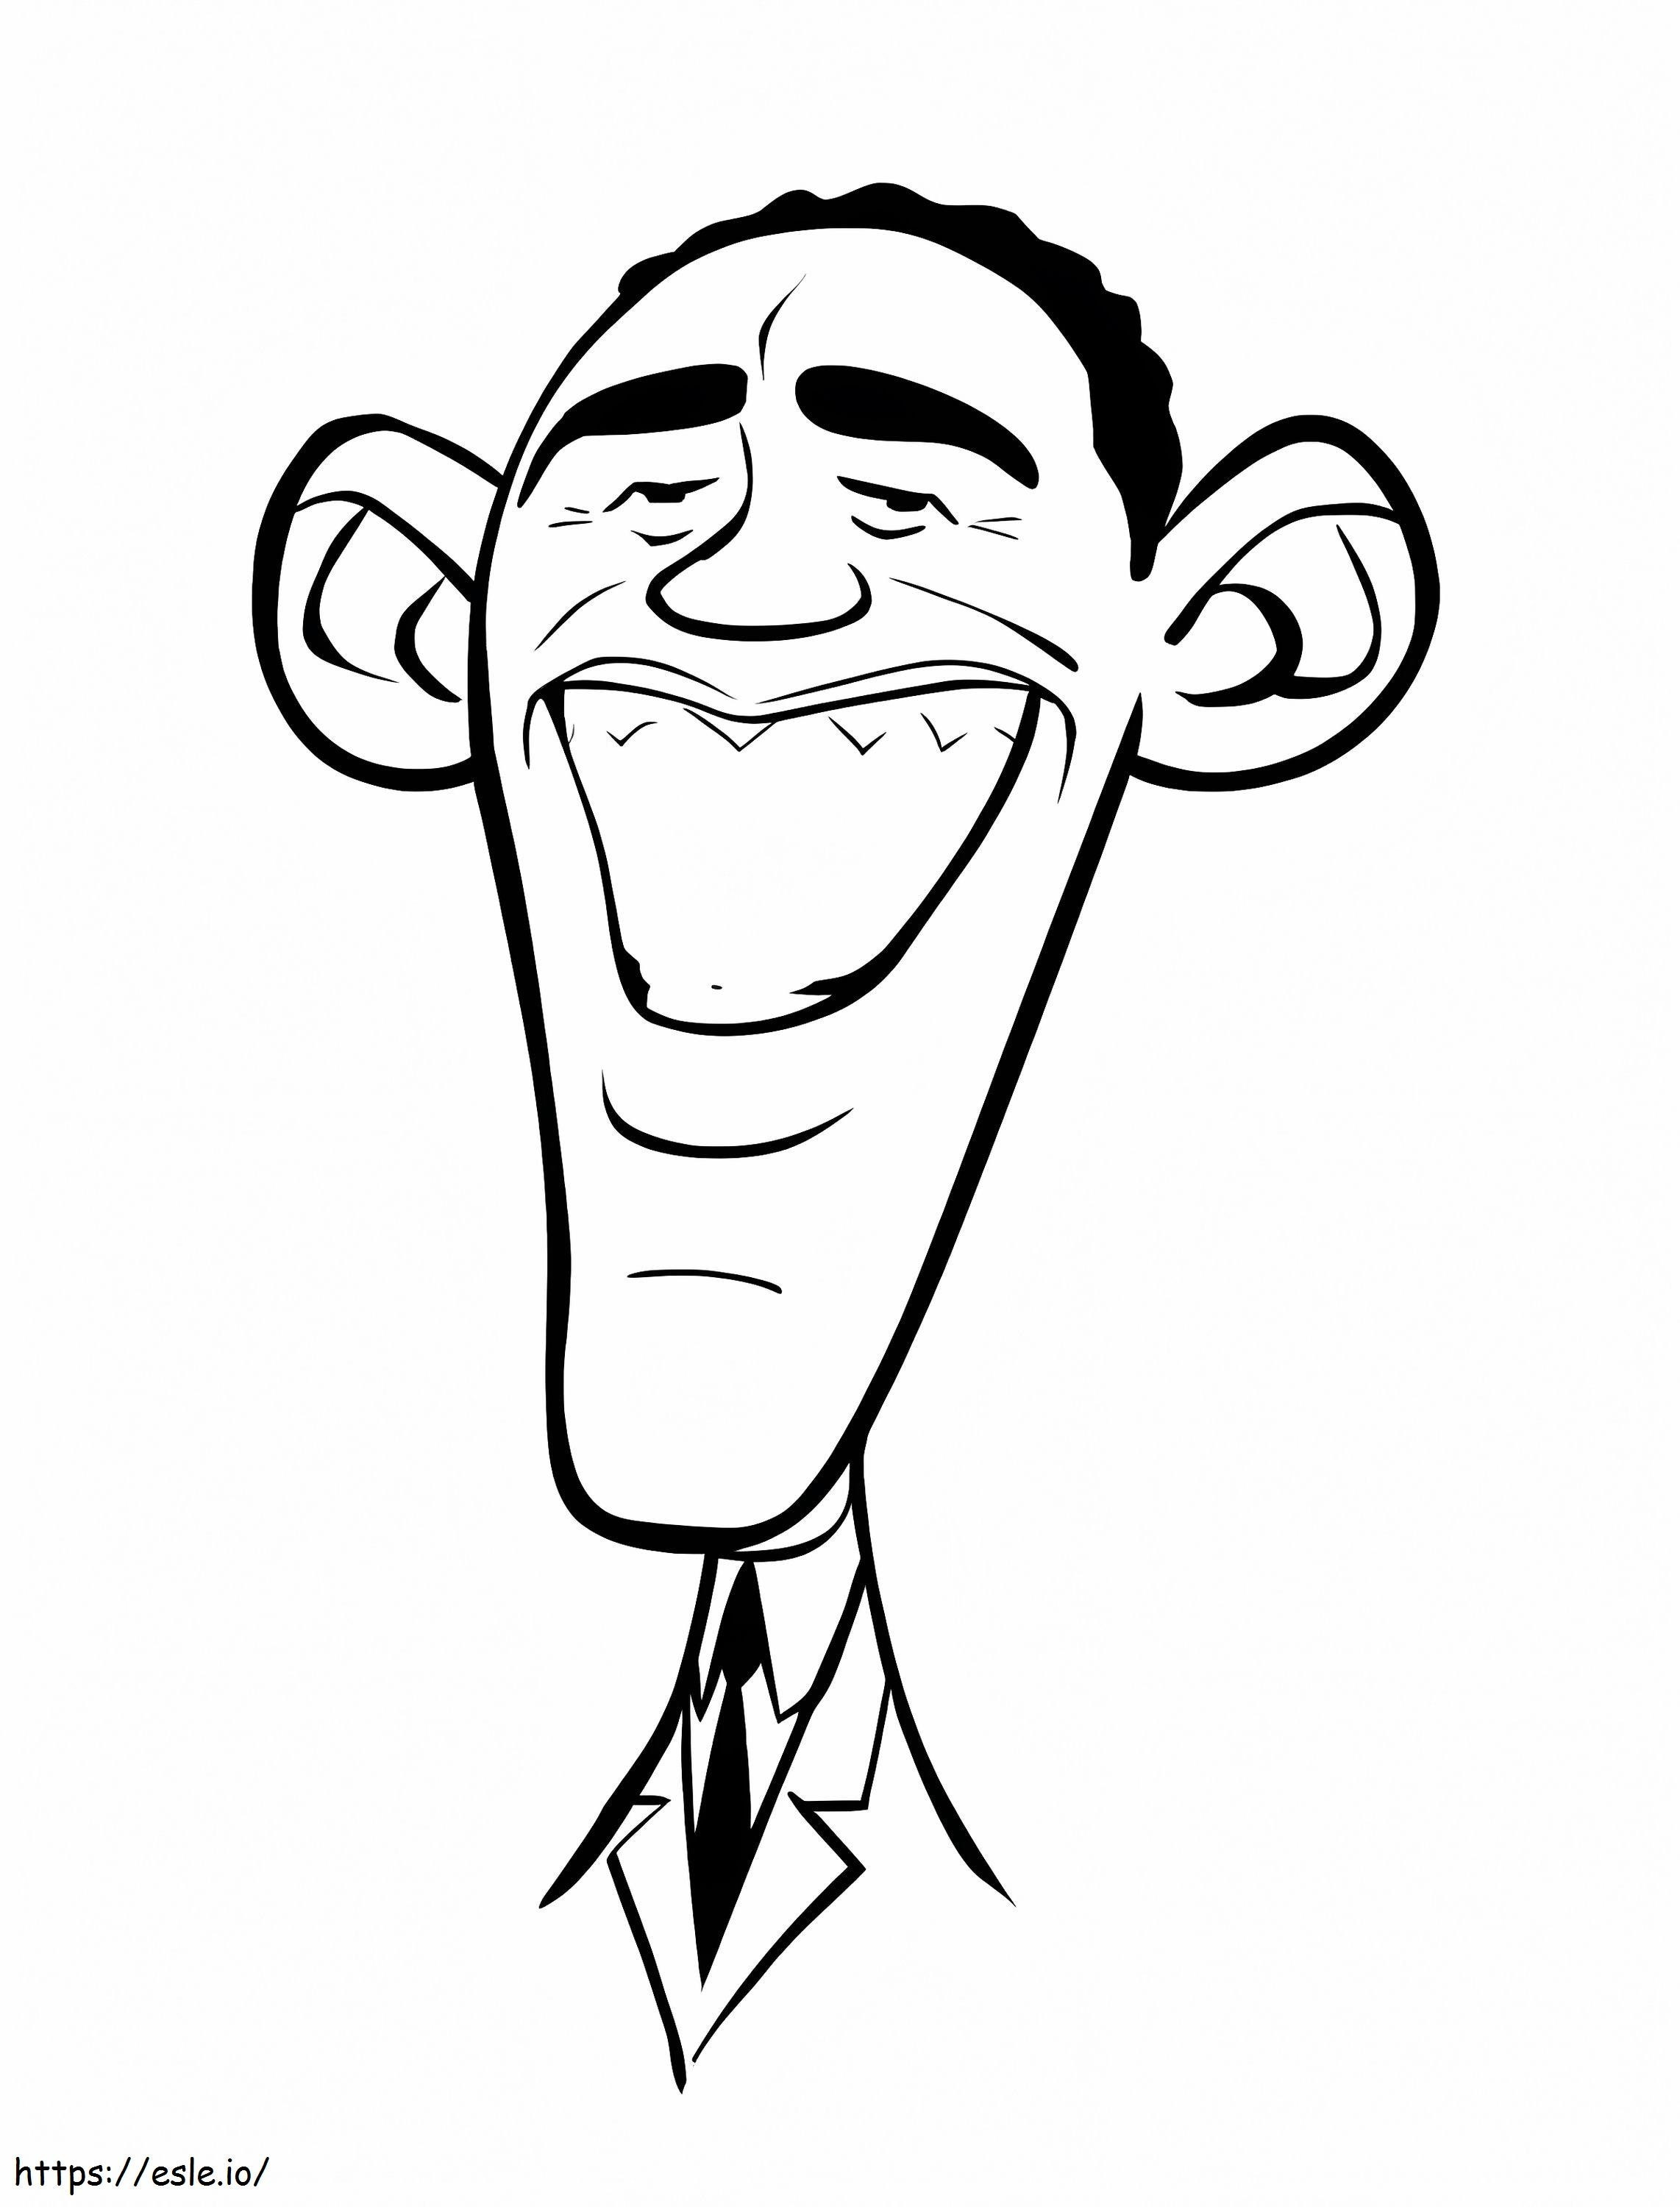 Barack Obama Caricature coloring page